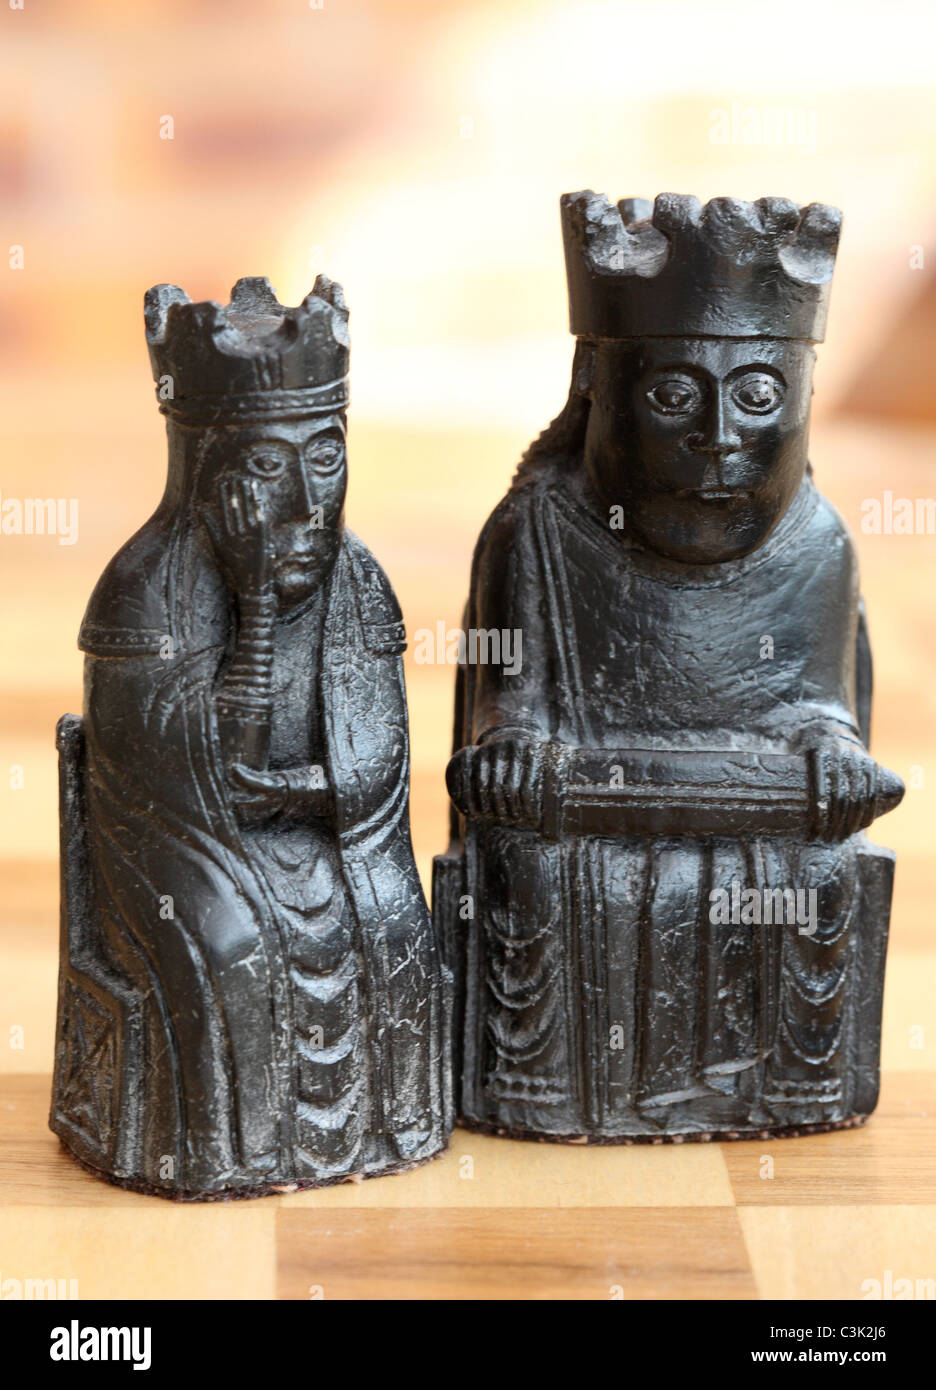 Black king and queen from the isle of lewis chess set Stock Photo